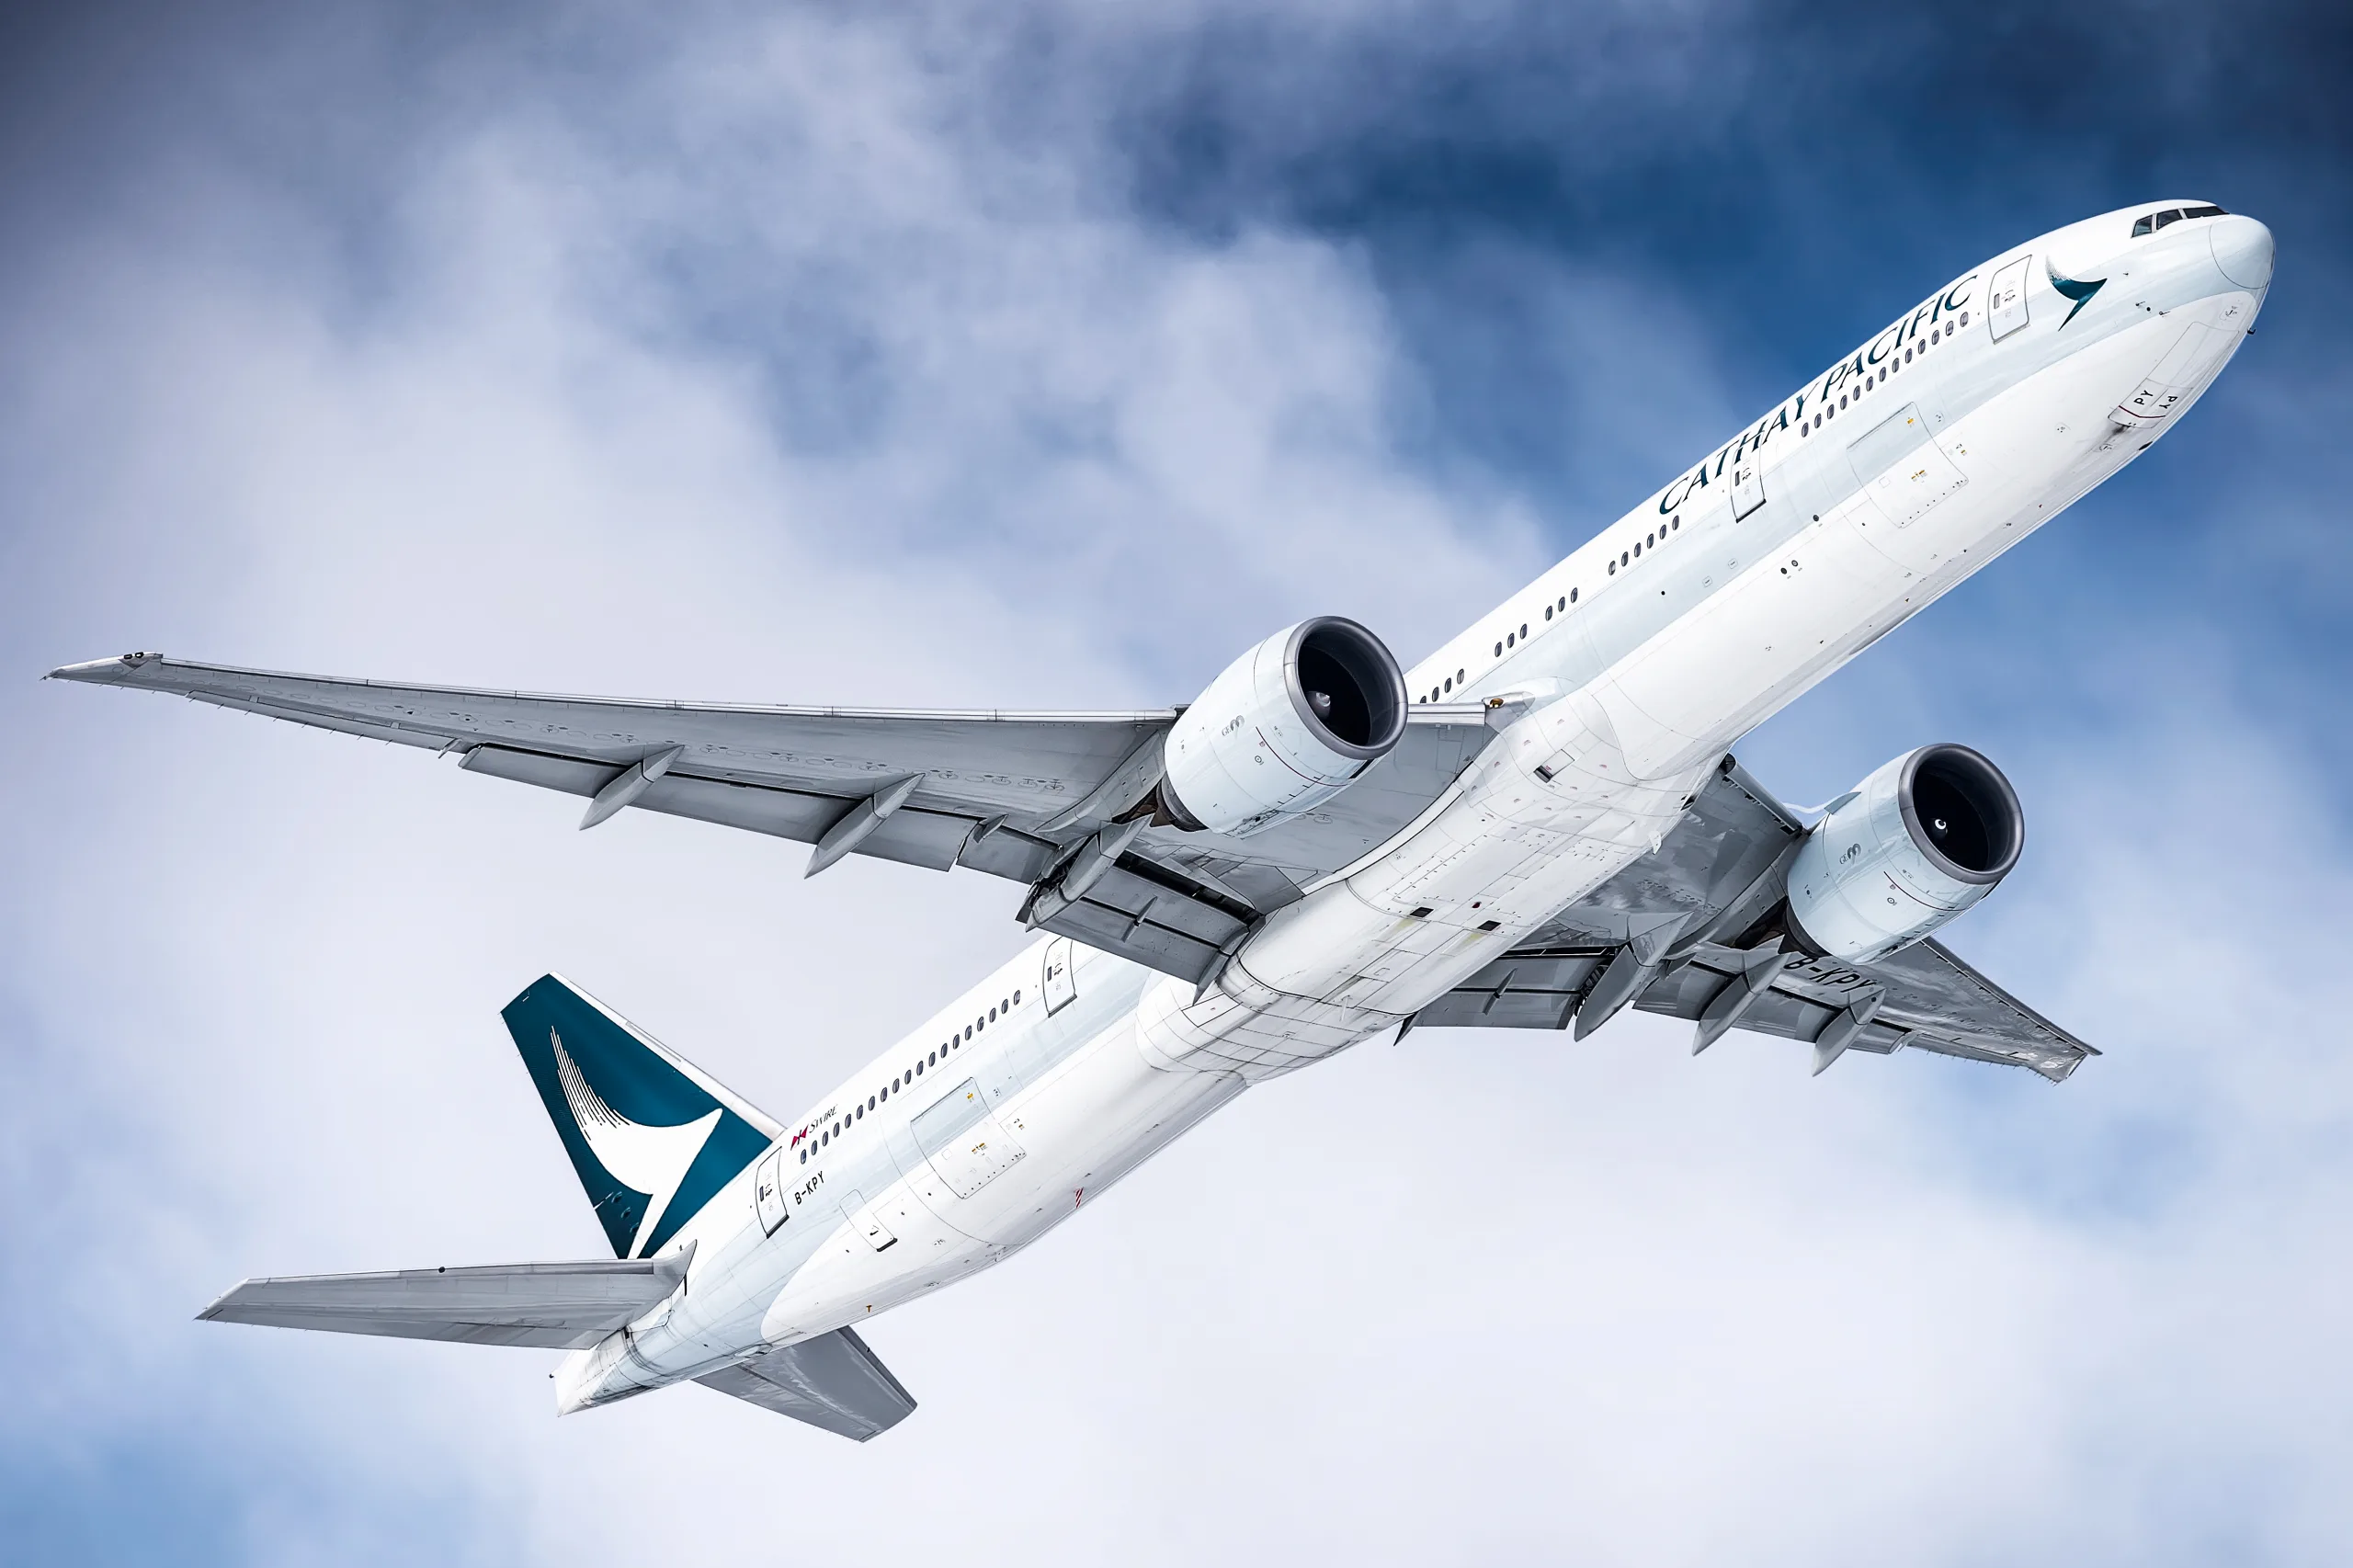 cathay pacific add travel insurance